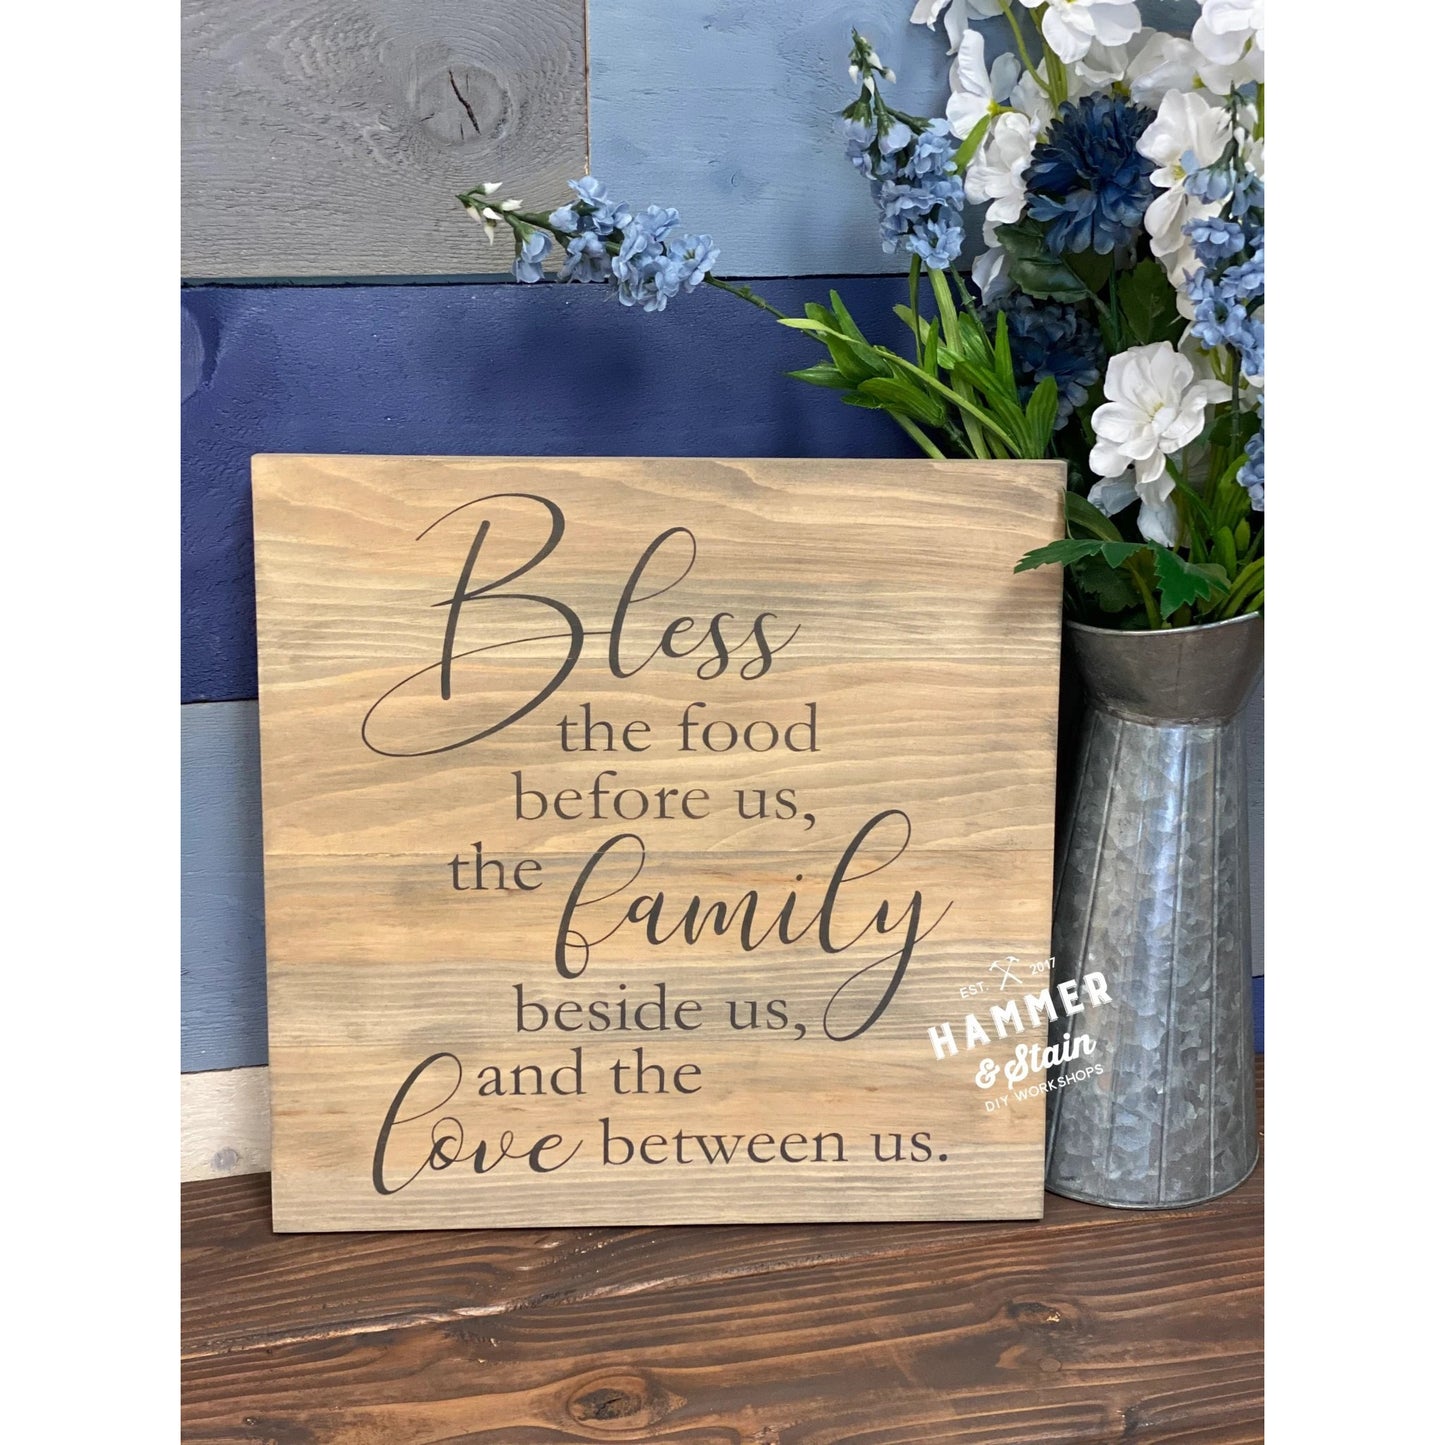 SQUARE PLANK SIGN 12 x 12"